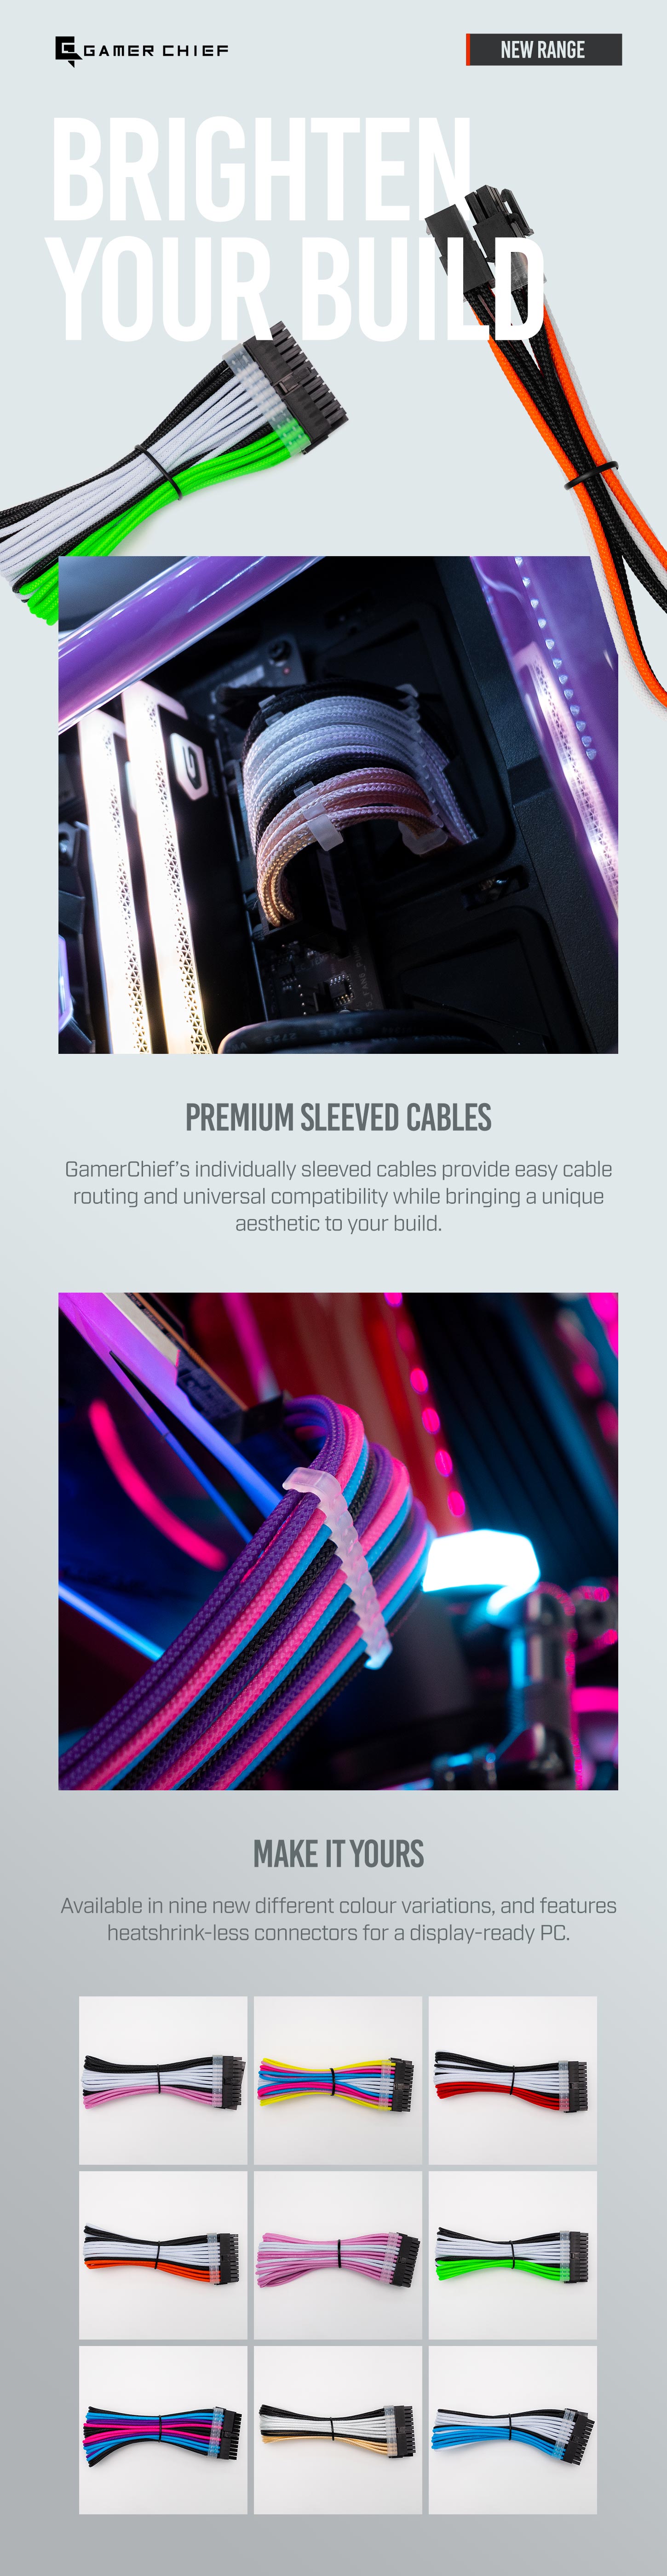 A large marketing image providing additional information about the product GamerChief Elite Series 8-Pin PCIe 30cm Sleeved Extension Cable (Blue / Pink / Purple / Black) - Additional alt info not provided